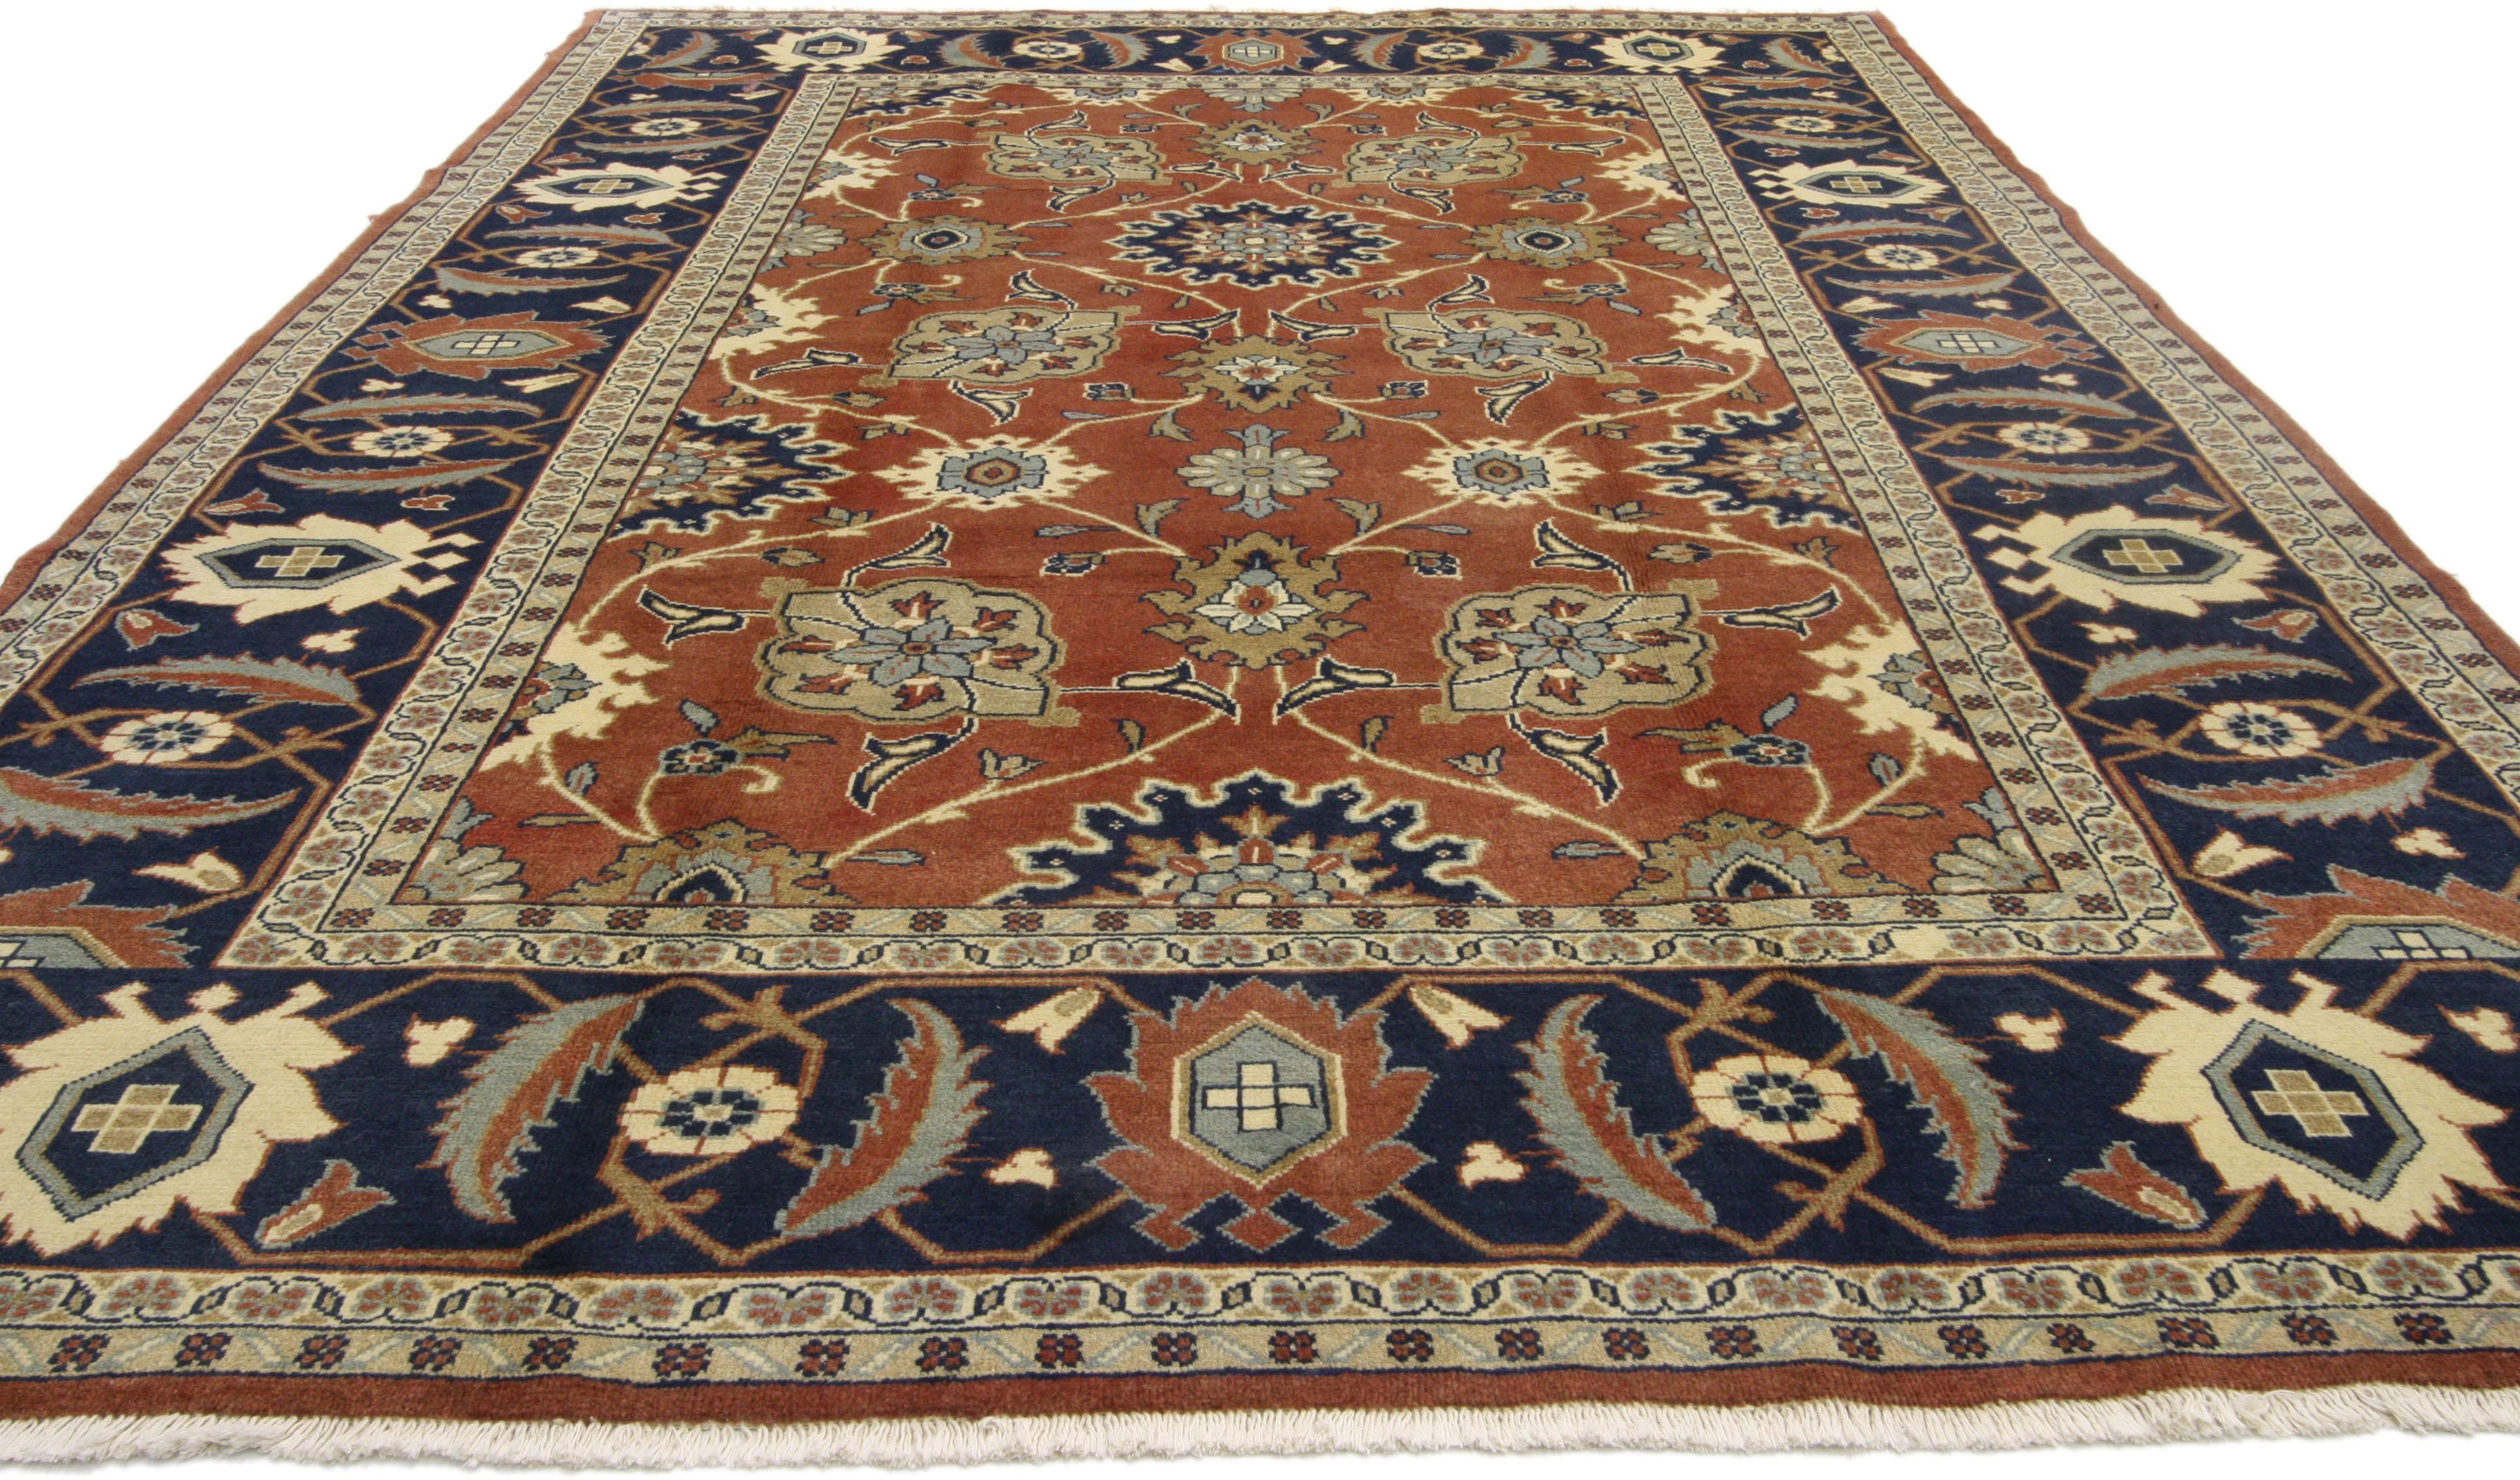 75842, Rustic style vintage Persian Mahal area rug. Stately with a bit of whimsical decadence this hand knotted wool vintage Persian Mahal area rug is the stylish answer to your upscale formal interior. Rendered in somber rust and ink blue tones